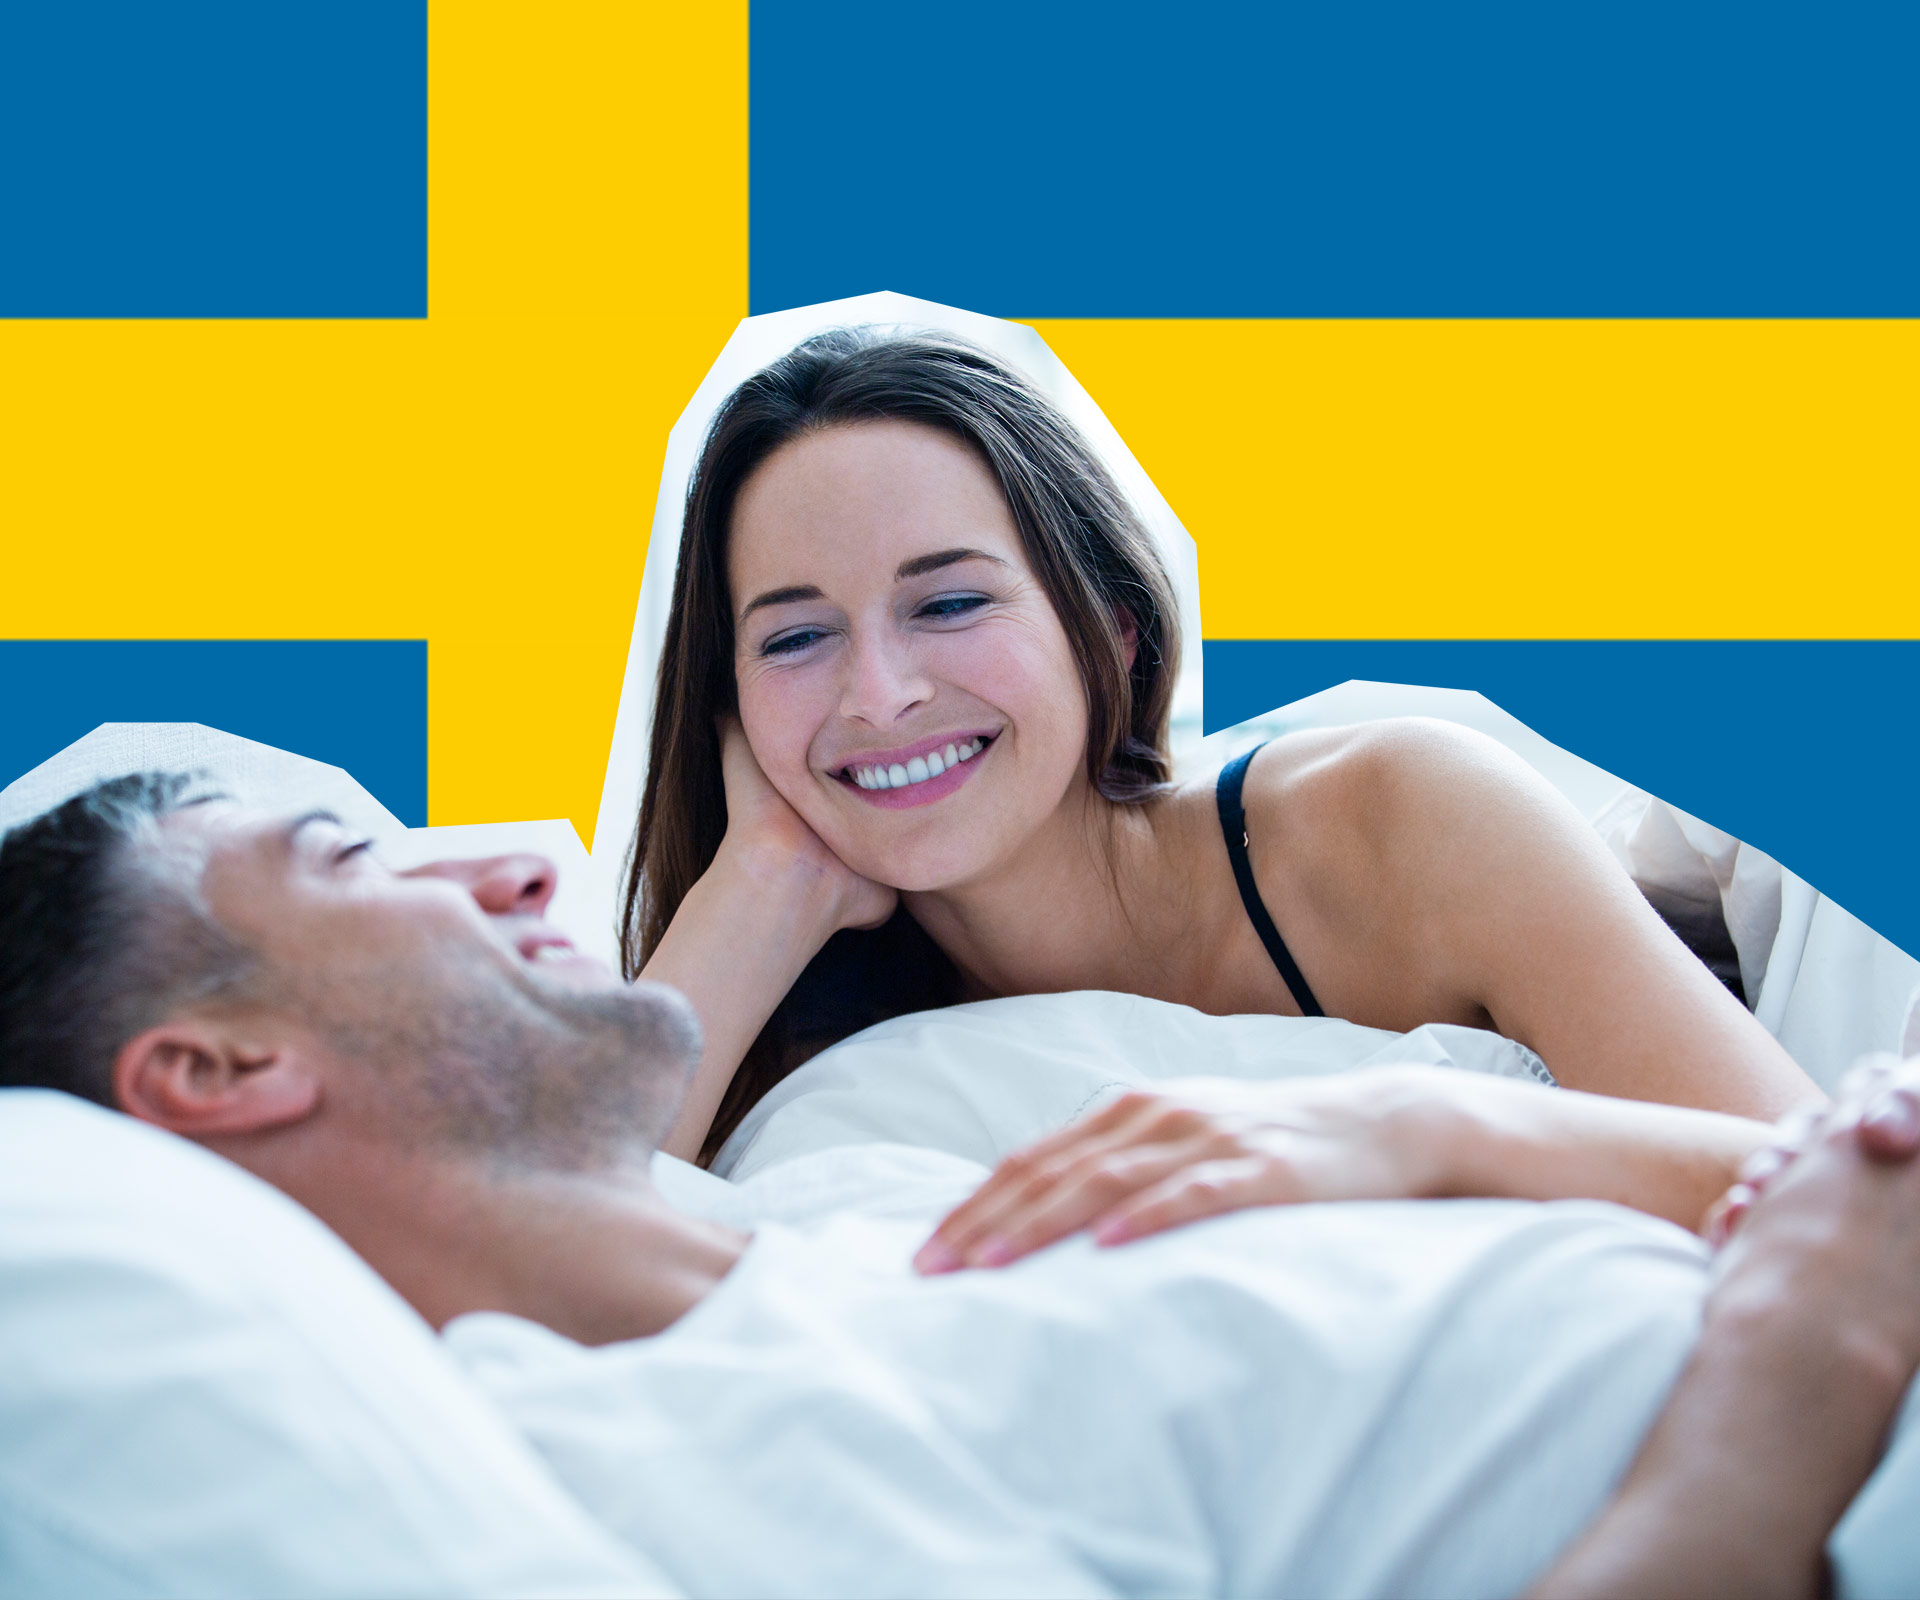 Hump day: Swedish politician says people should get 1-hour ‘sex breaks’ from work